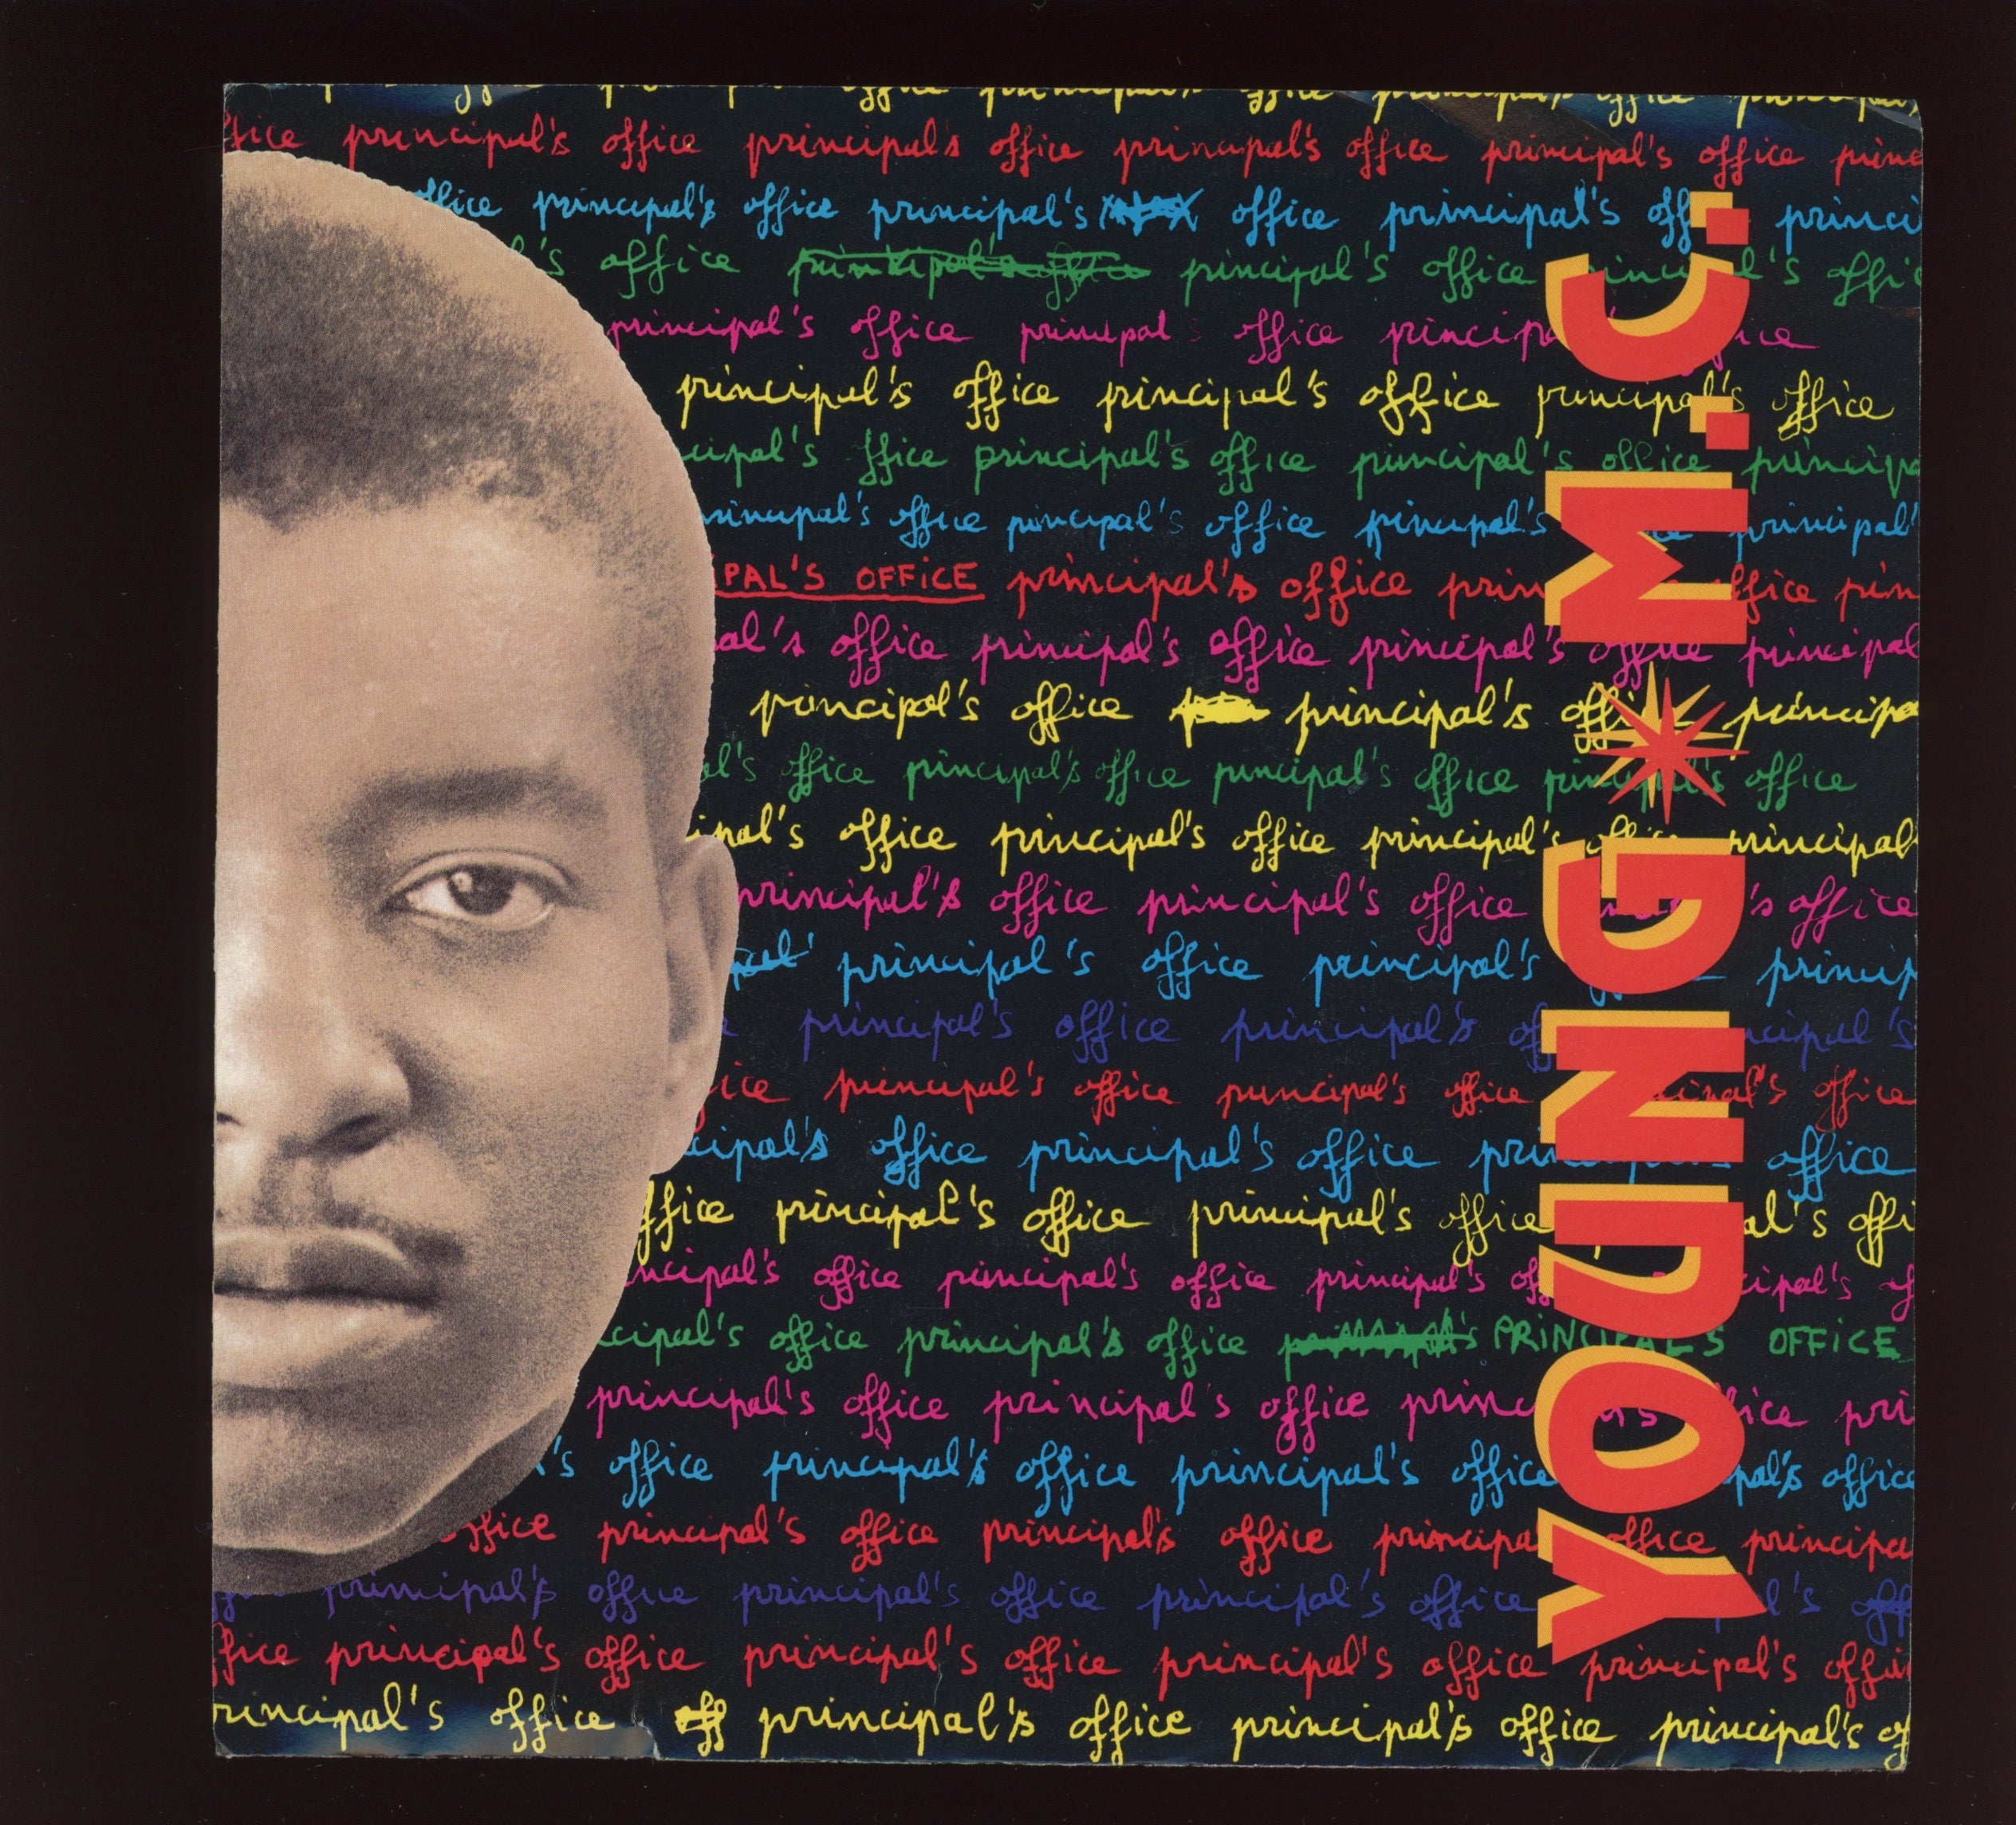 Young MC - Principal's Office on Delicious Vinyl With Picture Sleeve